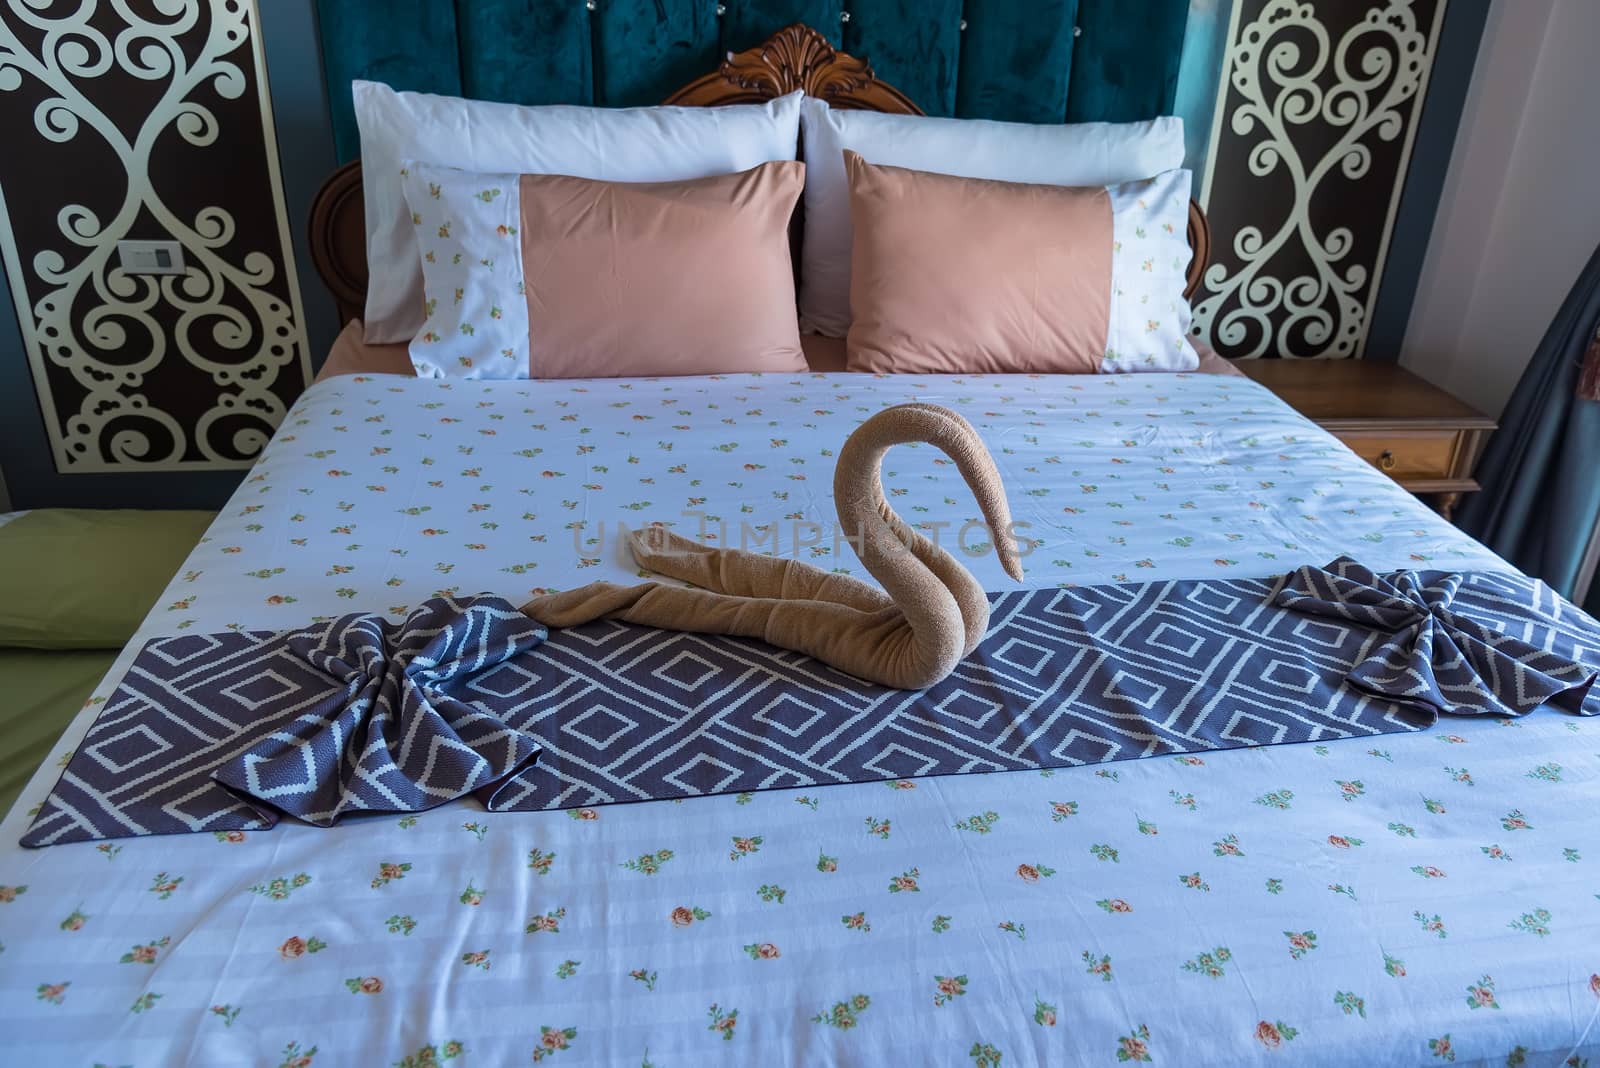 Swan shaped towel on the bed.concept travel.